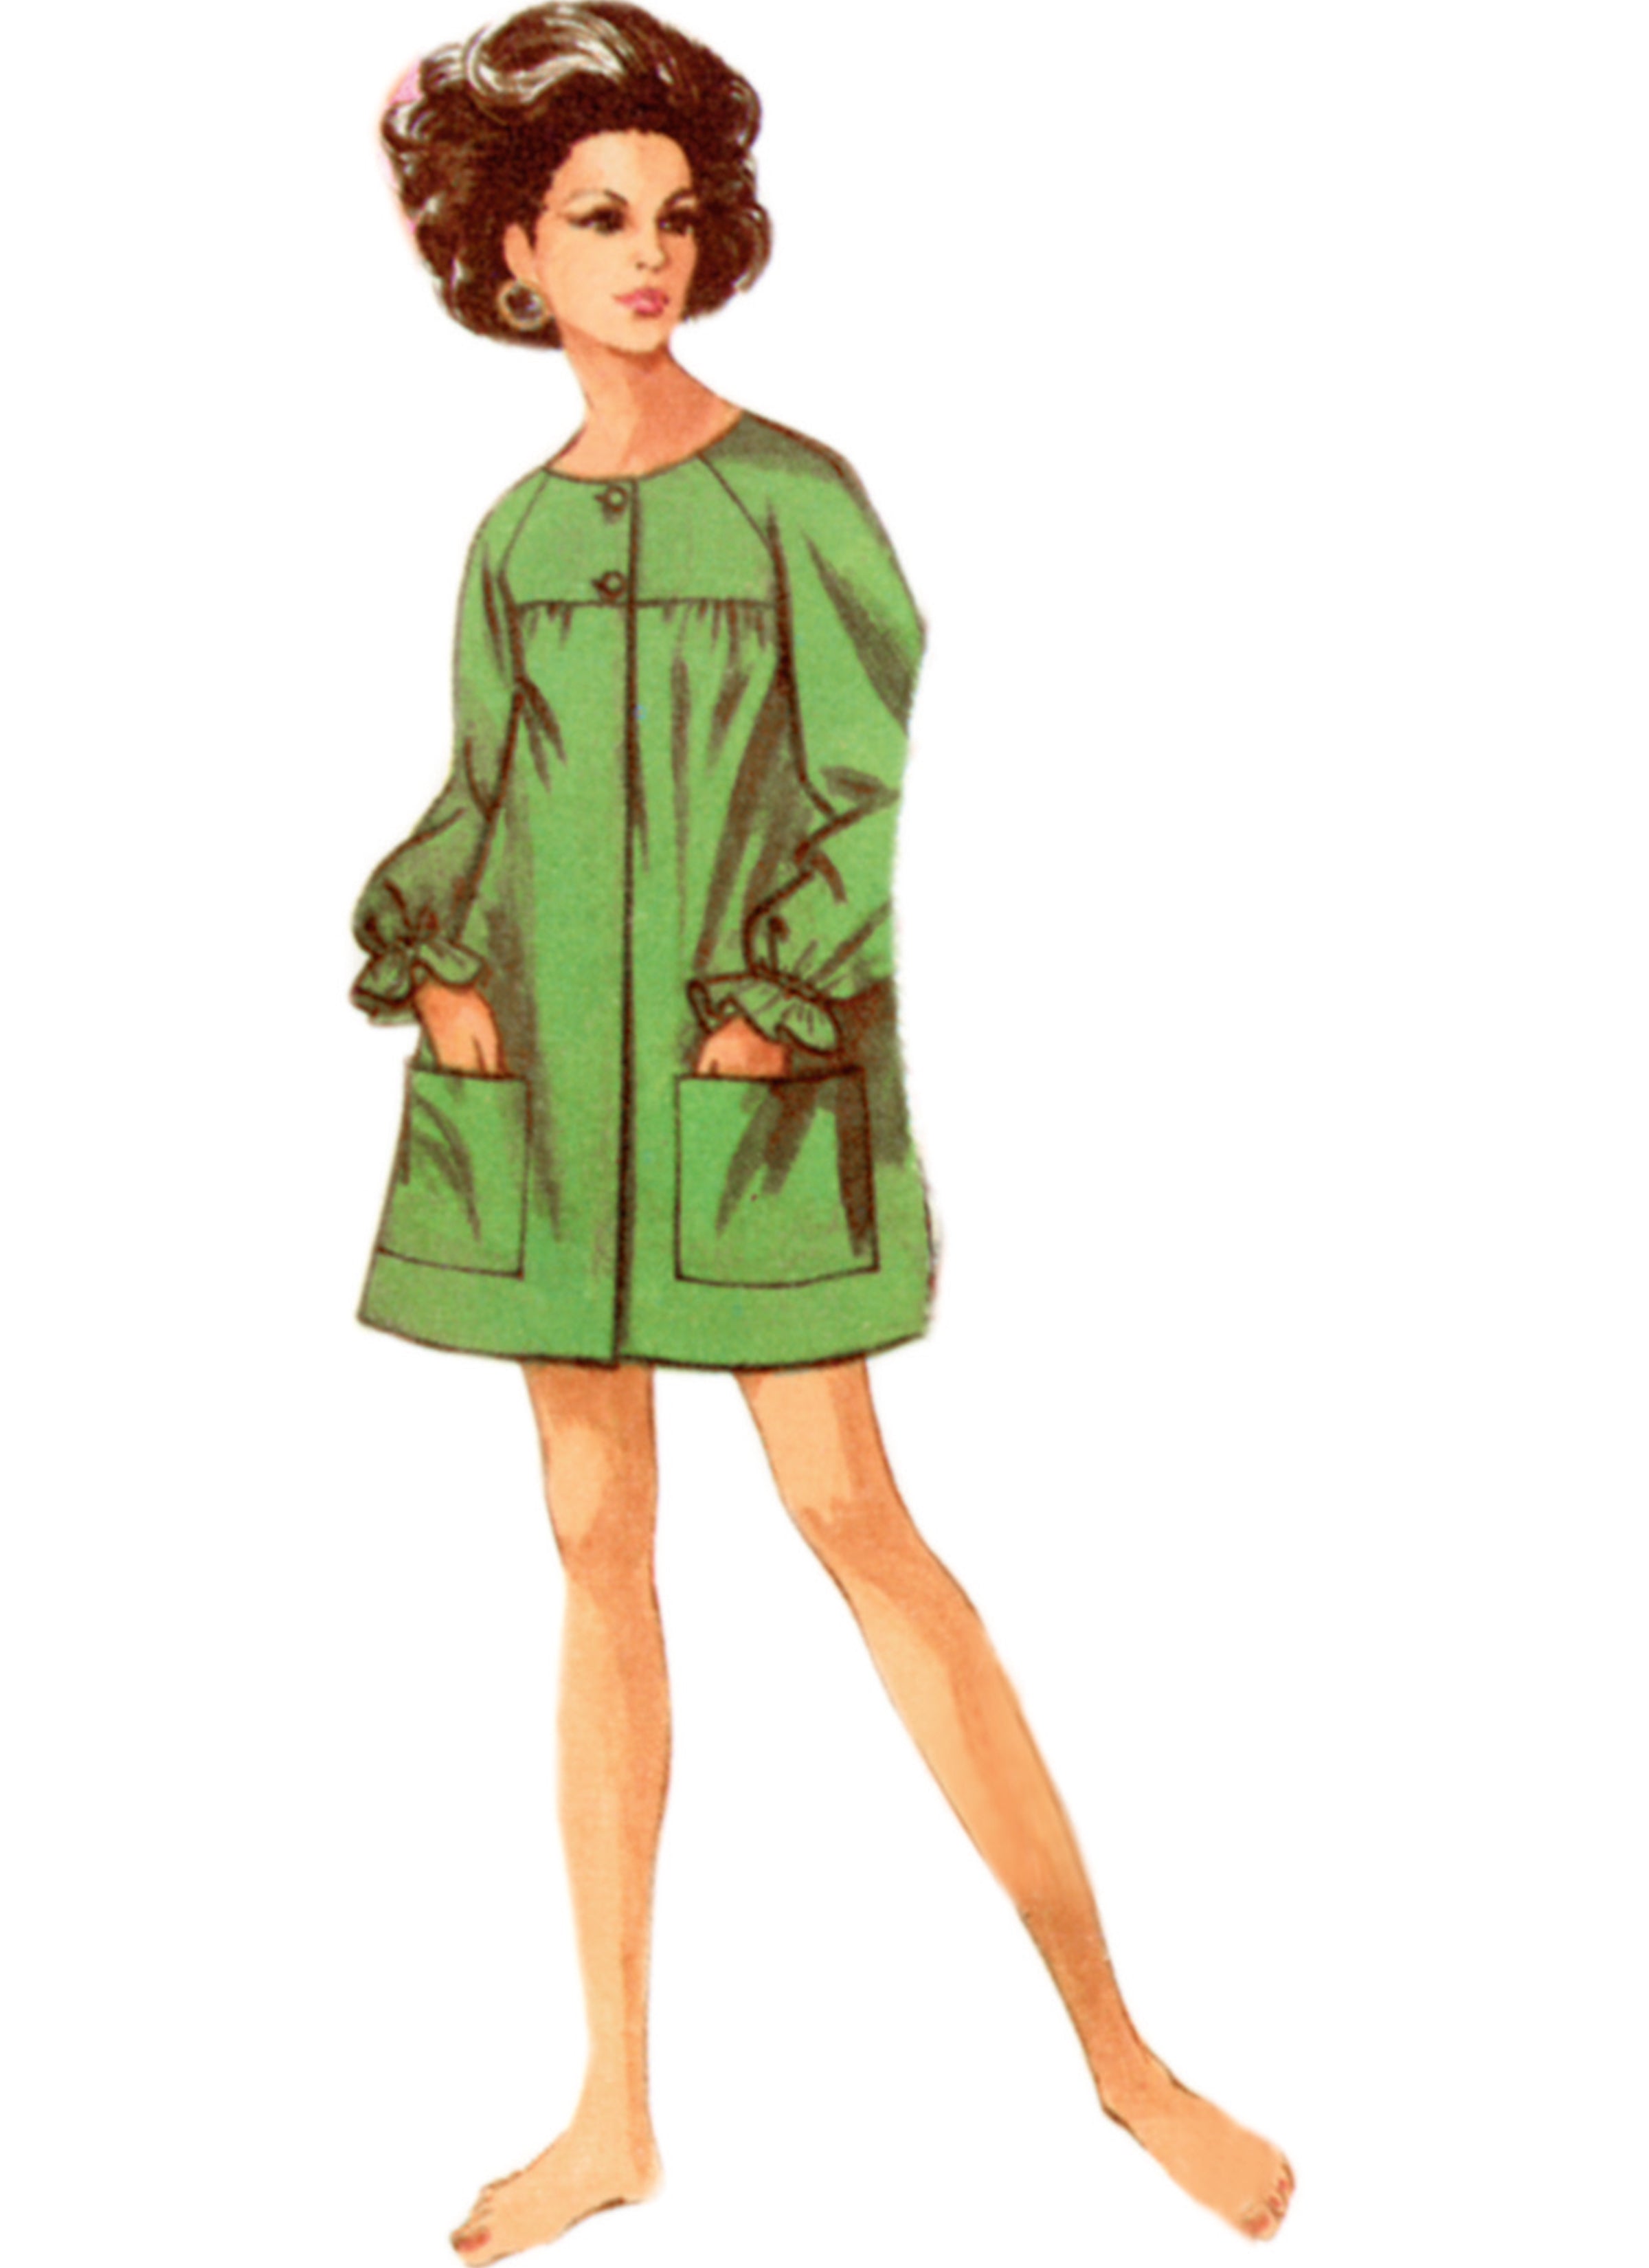 Simplicity Sewing Pattern 9914 for 1960's Beach Cover-Up and Robe from Jaycotts Sewing Supplies